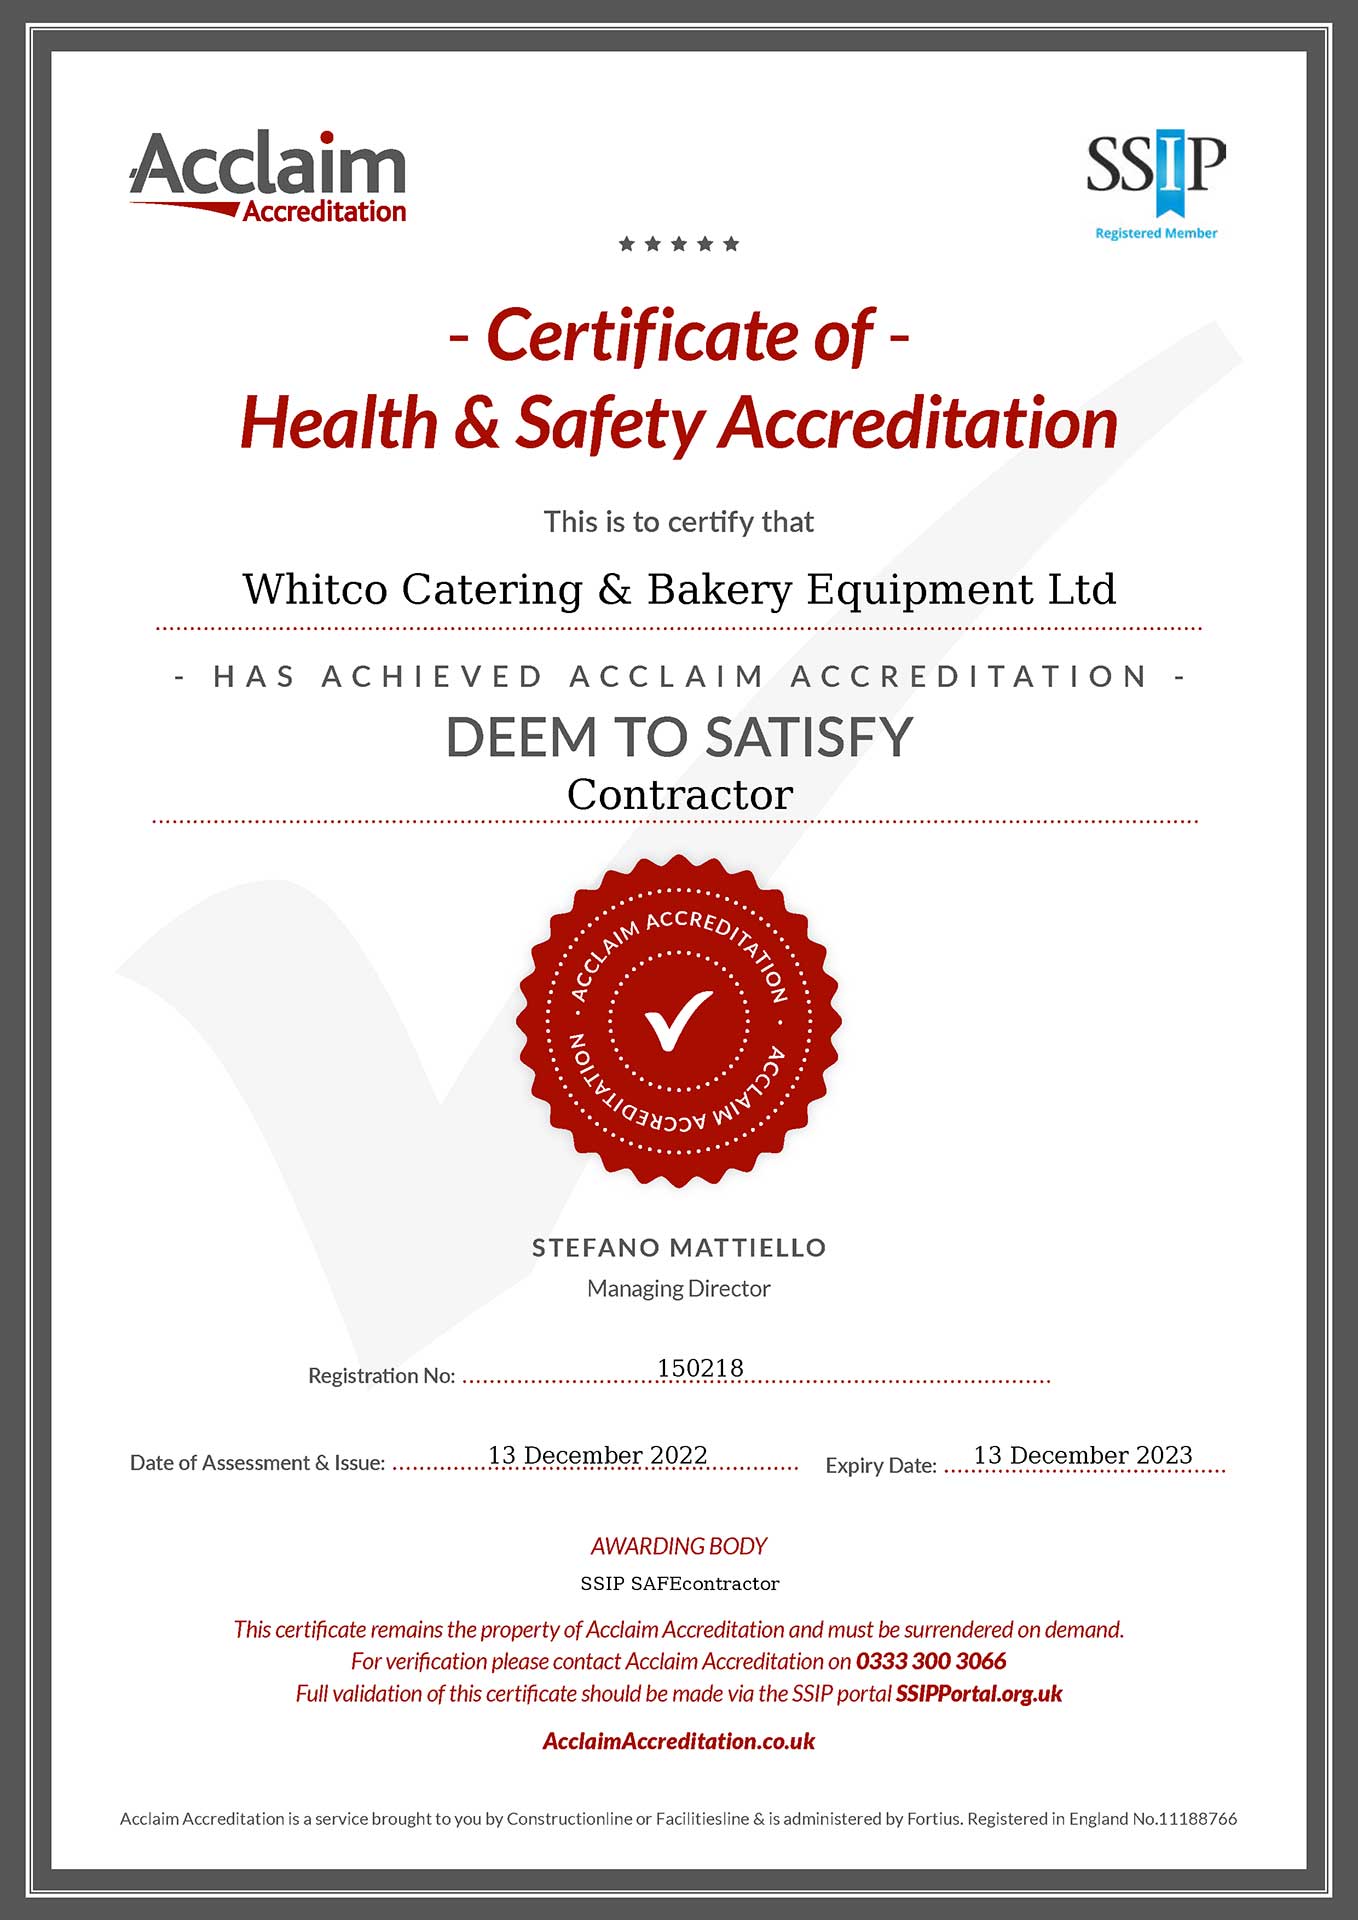 Certificate of Health & Safety Accreditation